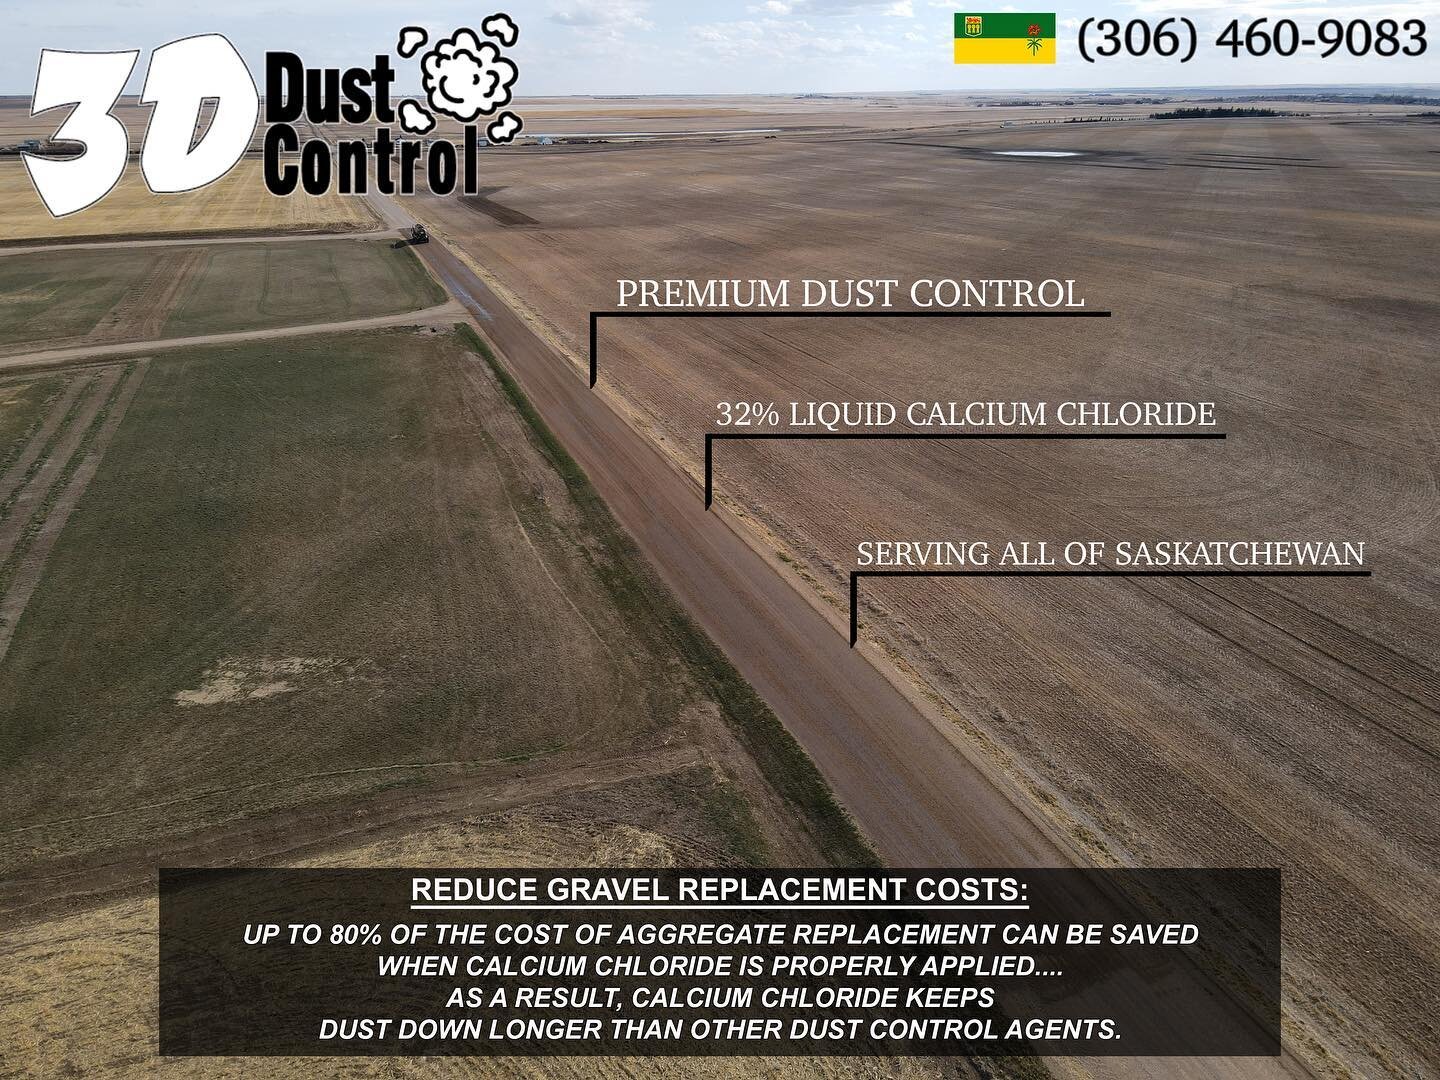 3D Dust Control is here to provide you with premium dust control throughout Saskatchewan. Give us a call today 💥 #3DTeam #TeamParm #DustControl